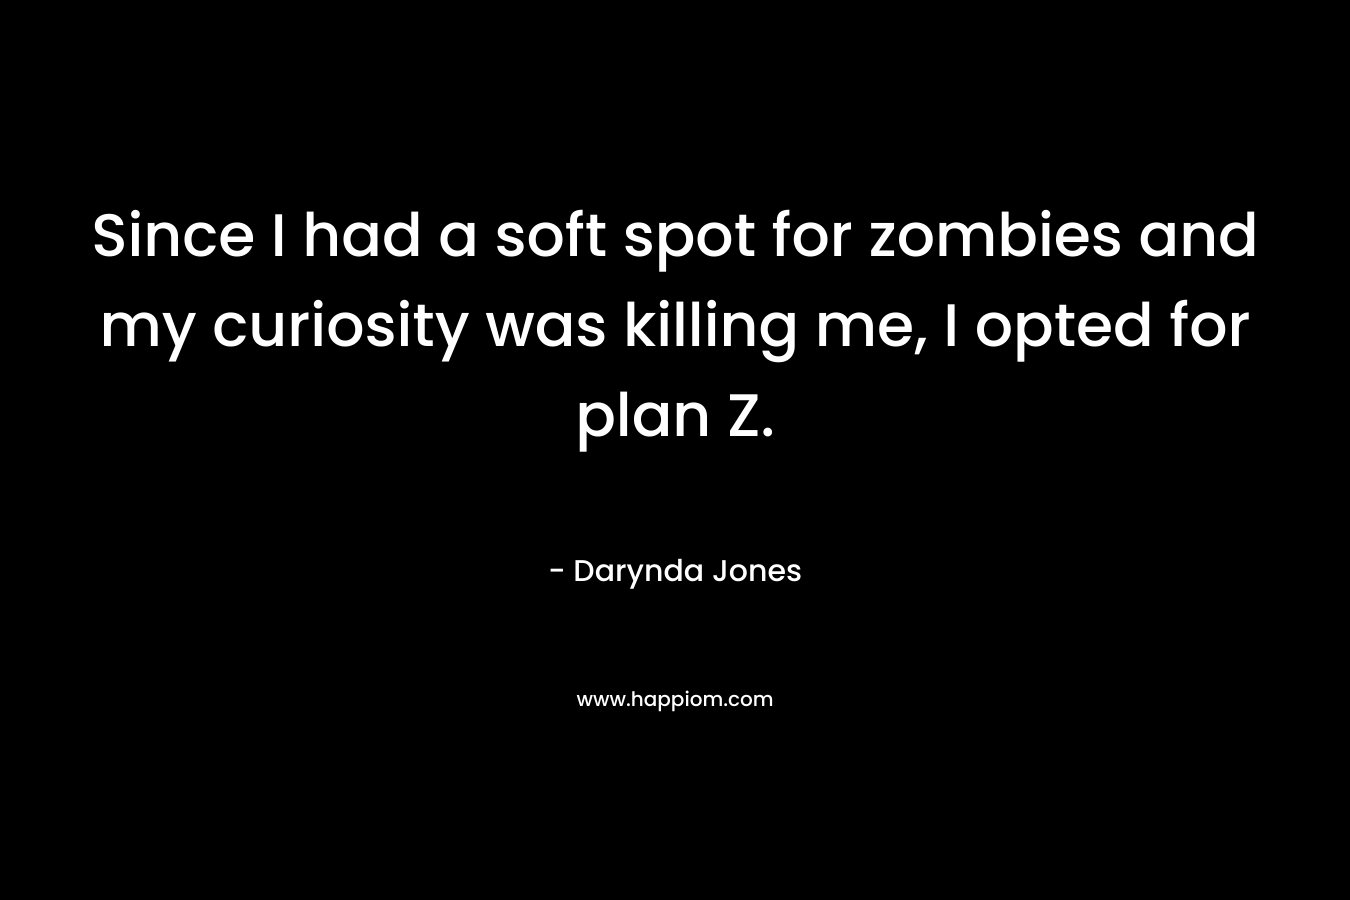 Since I had a soft spot for zombies and my curiosity was killing me, I opted for plan Z.